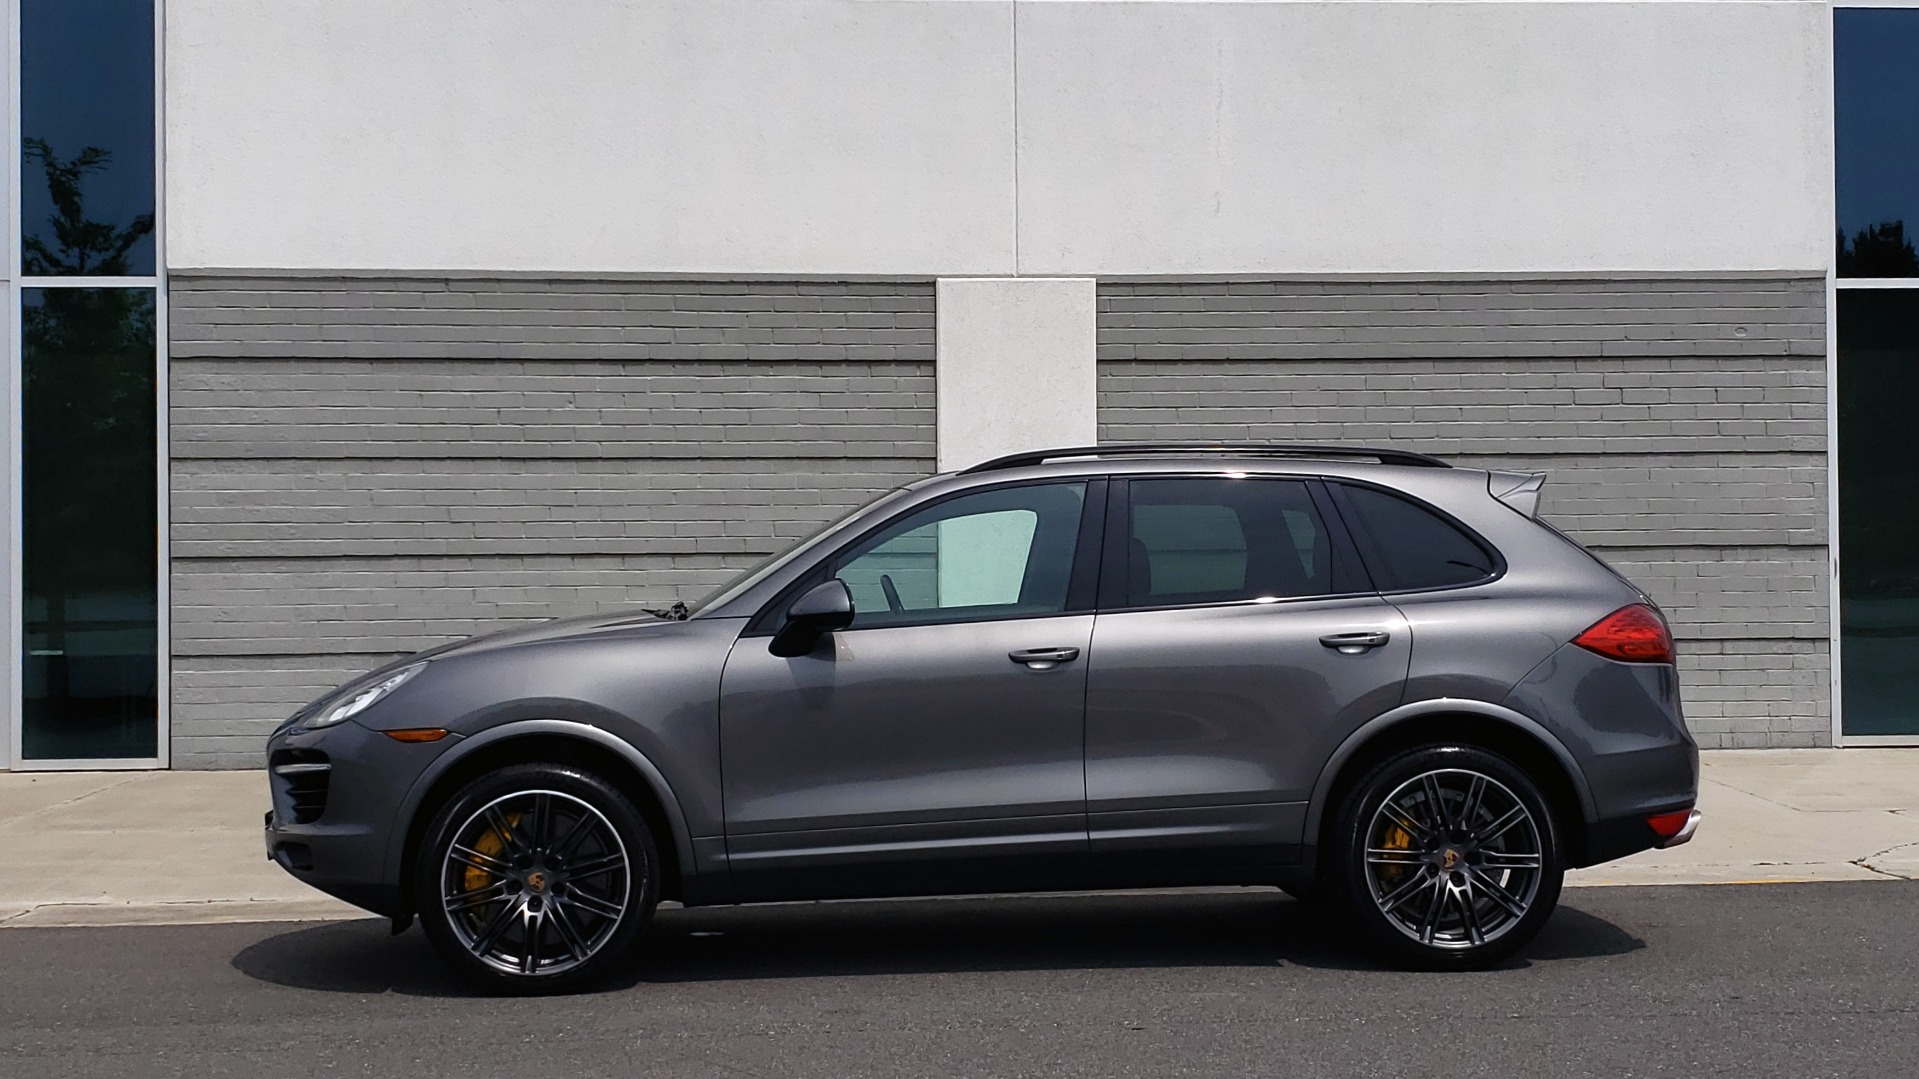 Used 2014 Porsche CAYENNE TURBO S / AWD / NAV / BOSE / PANO-ROOF / LCA / REARVIEW for sale Sold at Formula Imports in Charlotte NC 28227 5